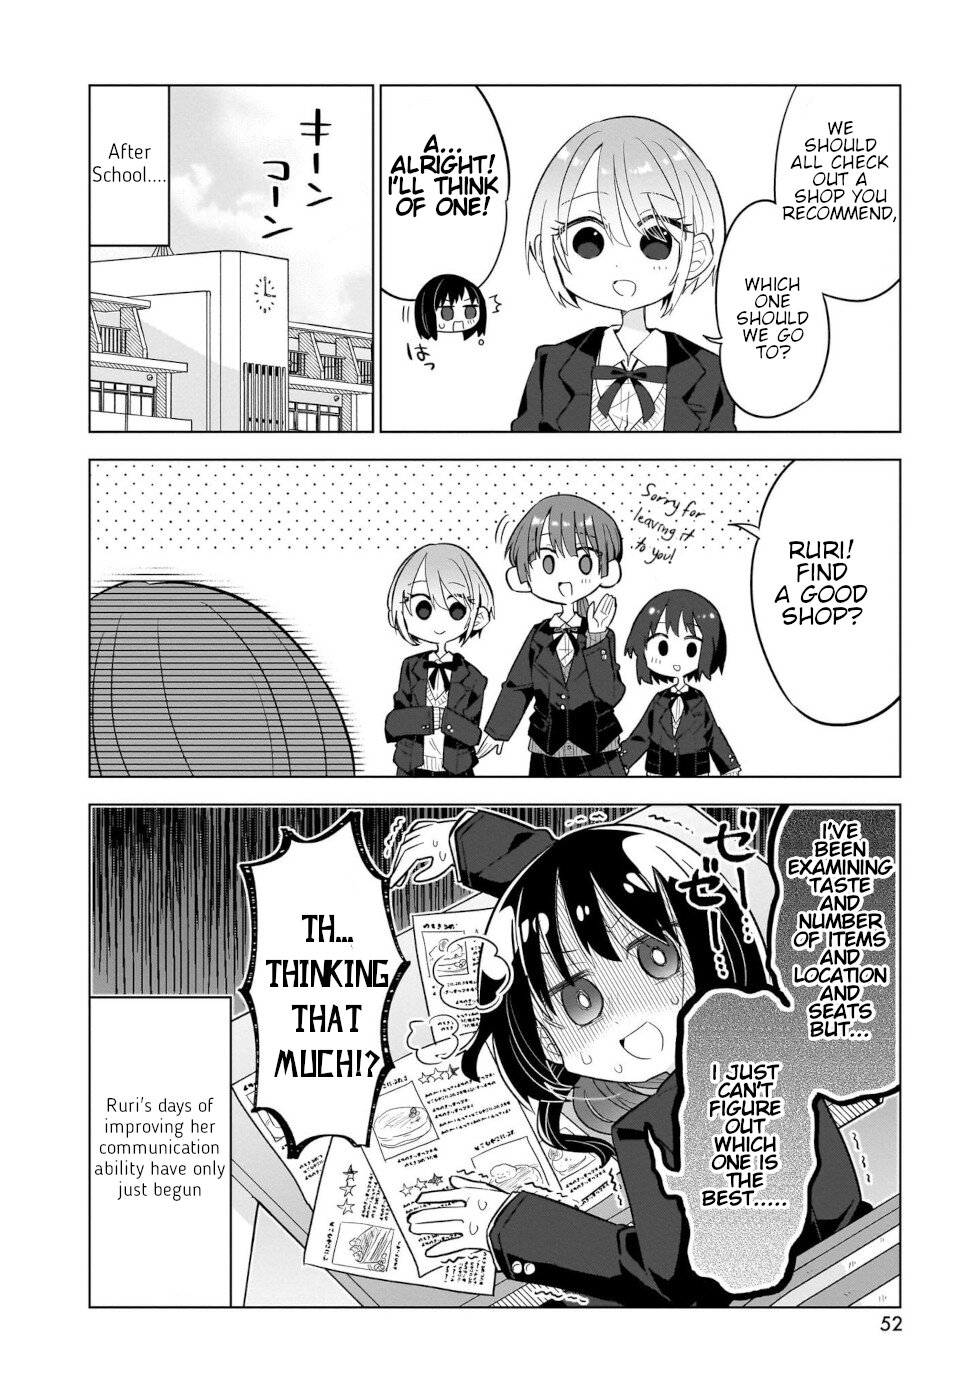 Sweets, Elf, And A High School Girl Vol.2 Chapter 7.5: Their Routine - Picture 2